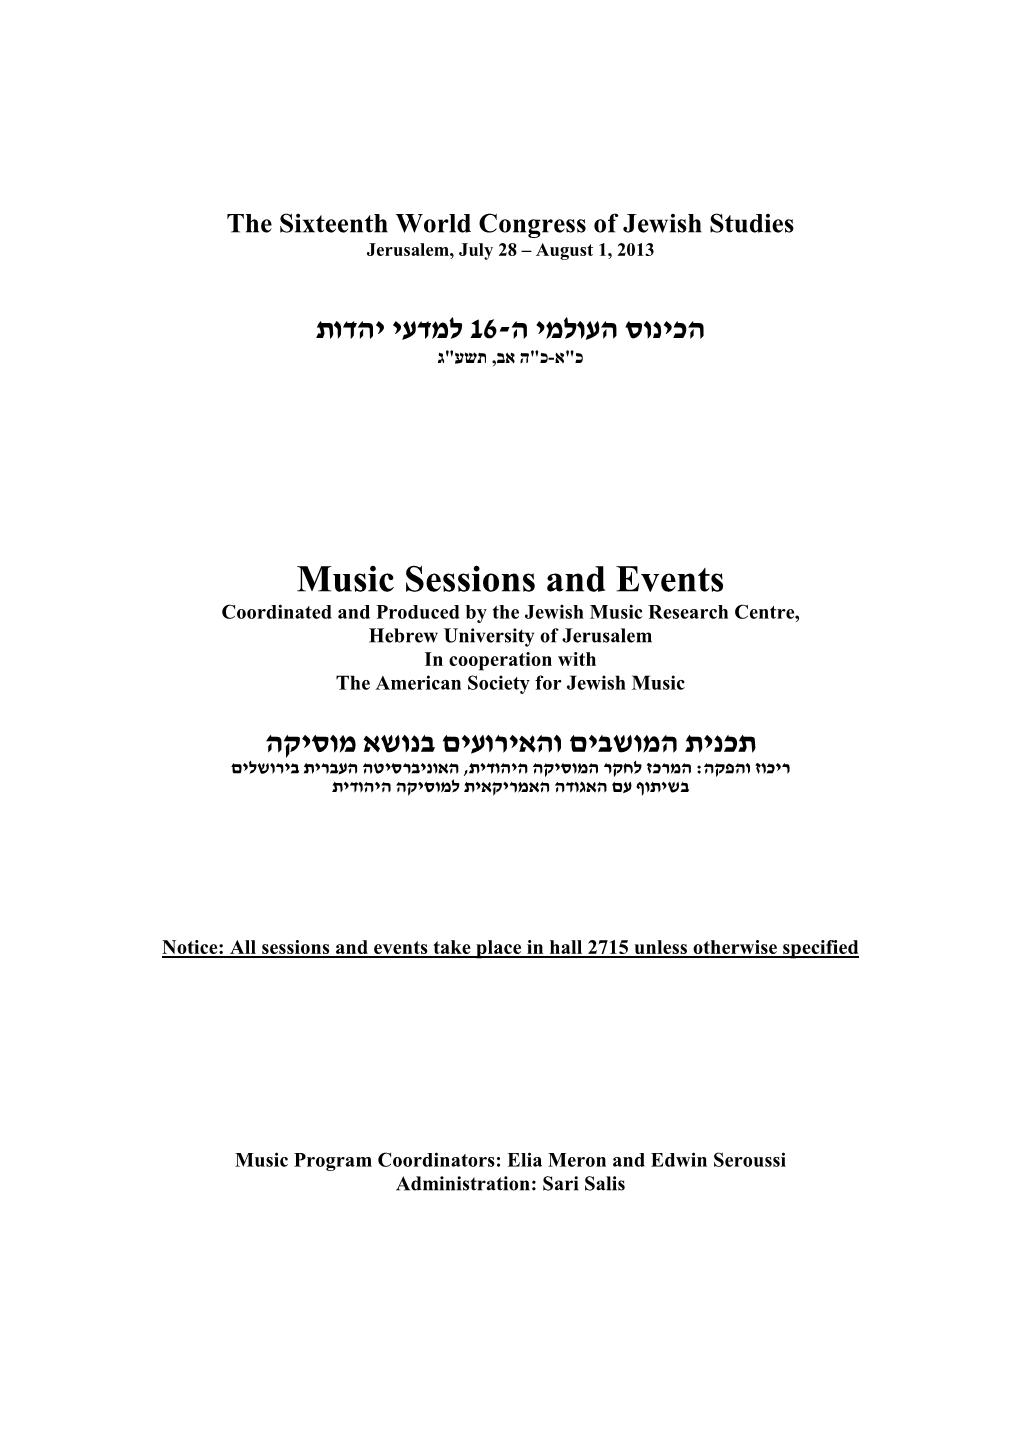 Music Sessions and Events